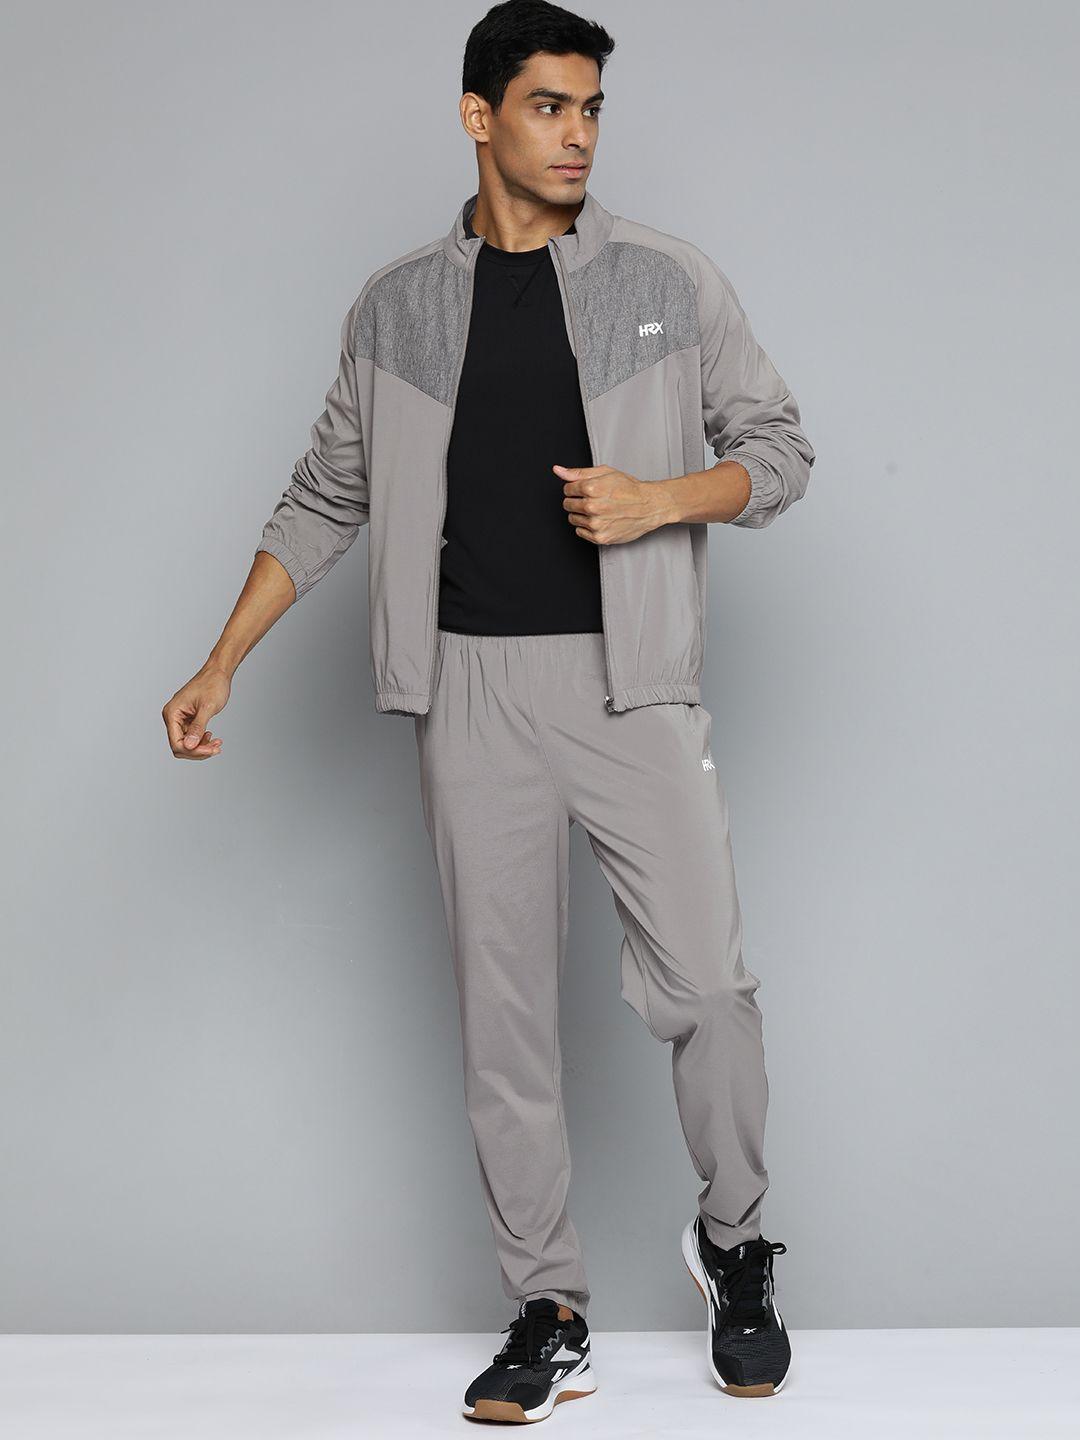 hrx by hrithik roshan rapid-dry antimicrobial running tracksuit